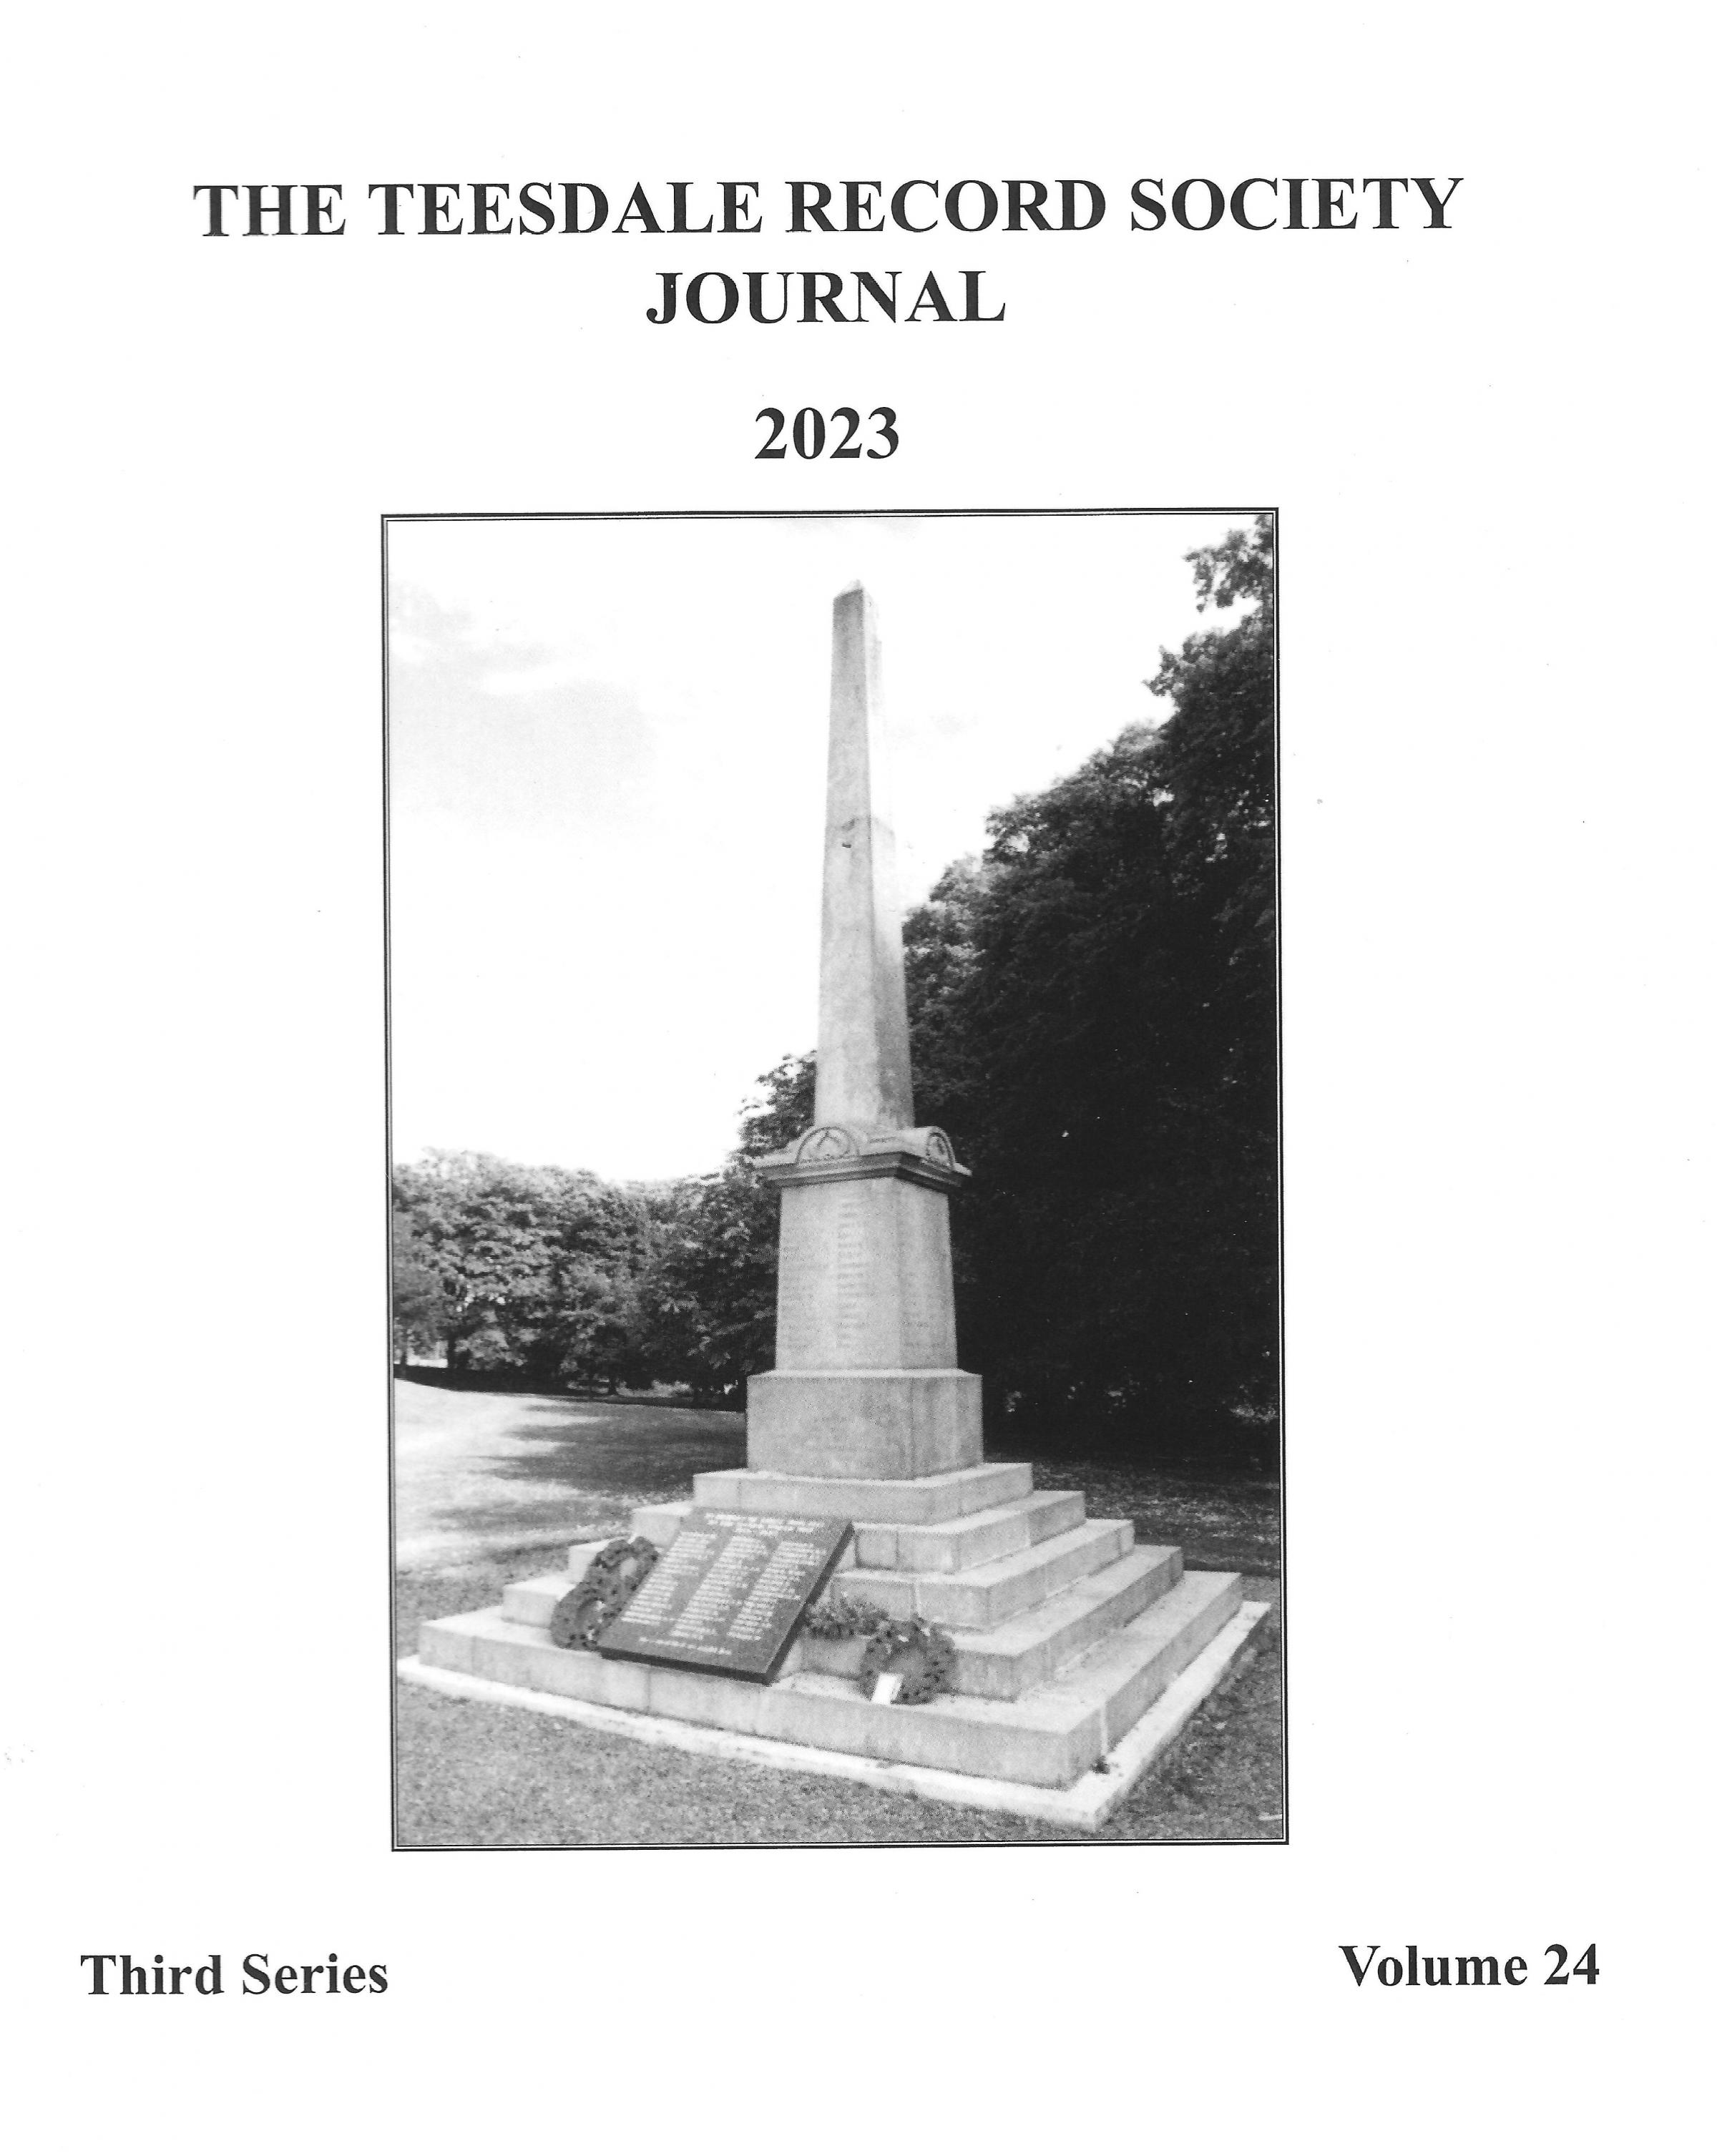 The new collection of papers from the Teesdale Record Society includes one that tells of the dales remarkably cheesy links to London